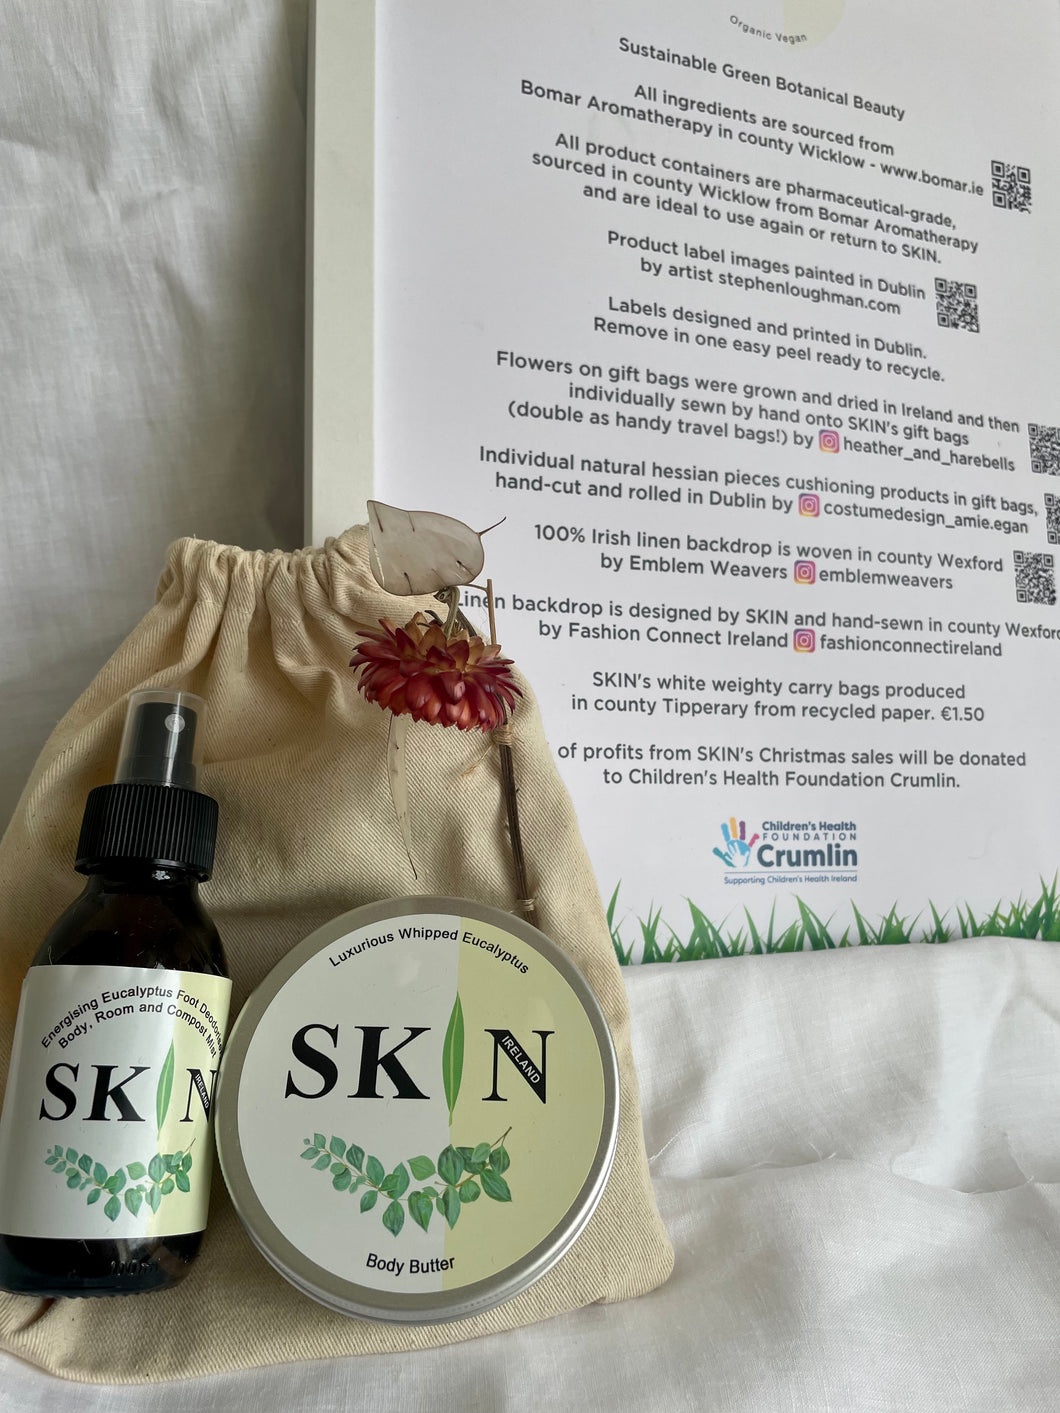 Sustainable Gift Bag of Large (200ml) Luxurious Eucalyptus Body Butter and Energising Eucalyptus Foot Deodoriser, Body and Room Mist. Gift bag features Irish grown and naturally dried flower, hand-sewn onto linen bag - handy for travel !